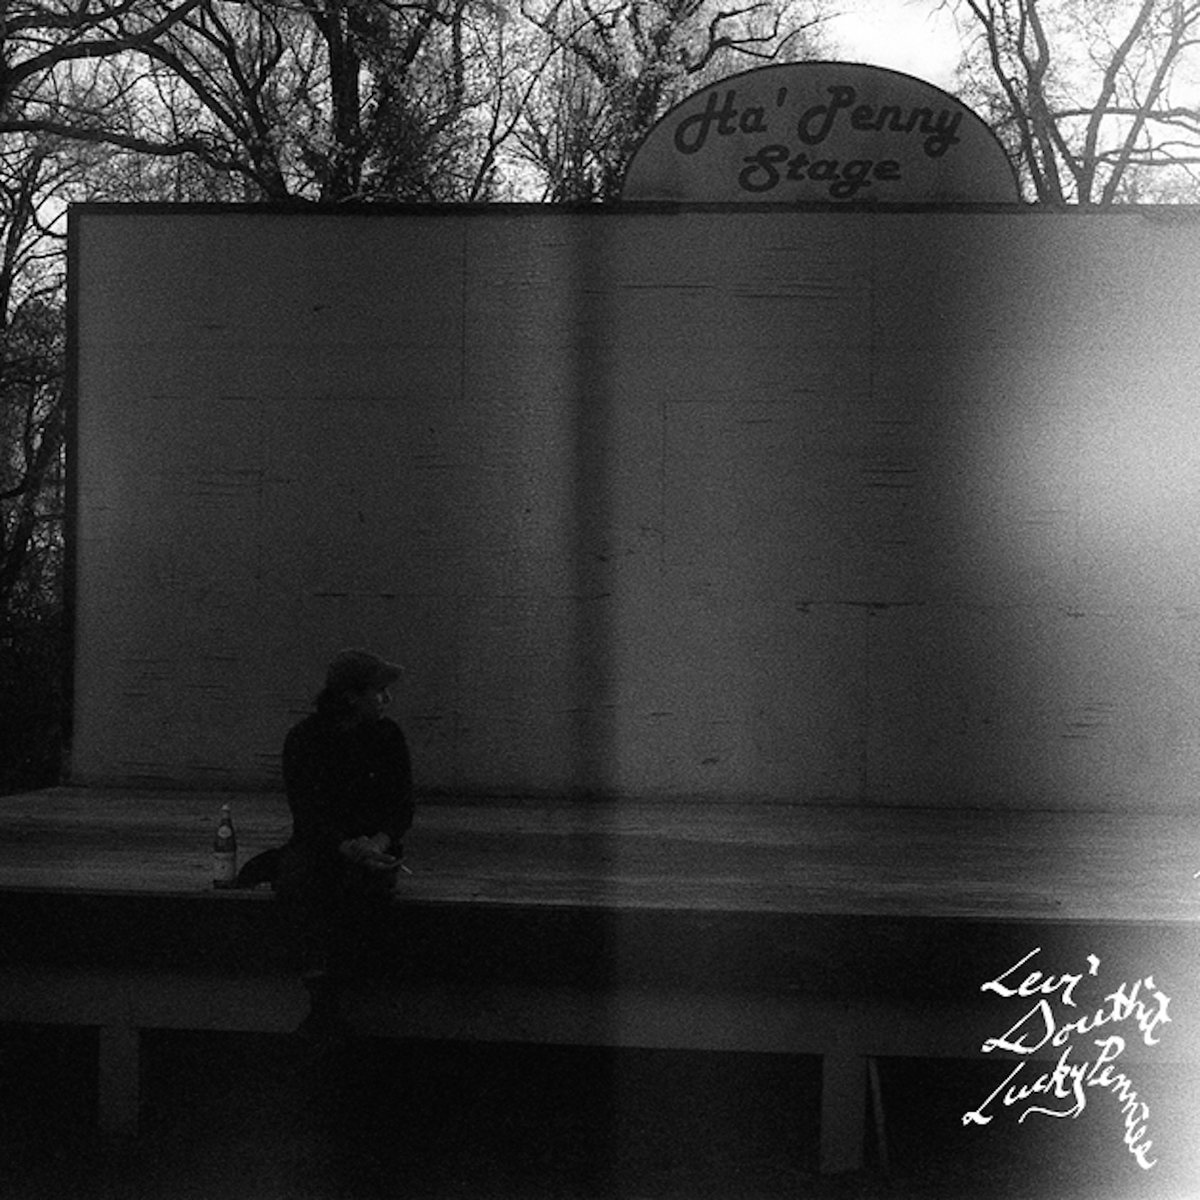 levi douthit lucky pennies album art - black and white photo of a man sitting on an outdoor stage